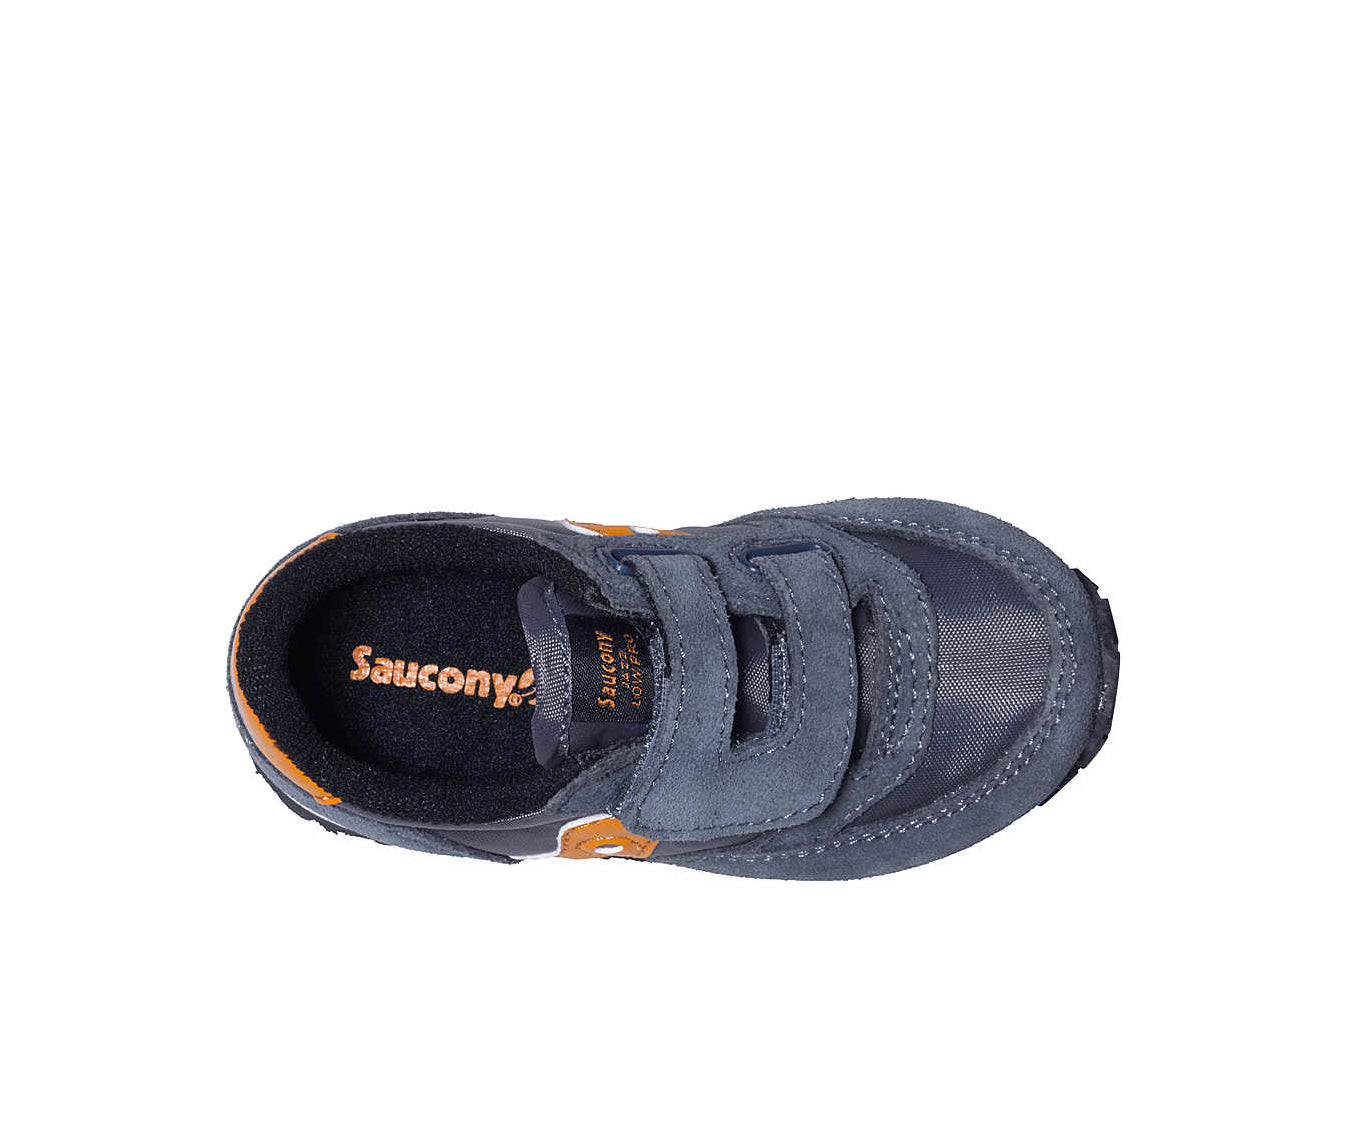 A steel blue suede and mesh low-cut Saucony sneaker with orange accents.